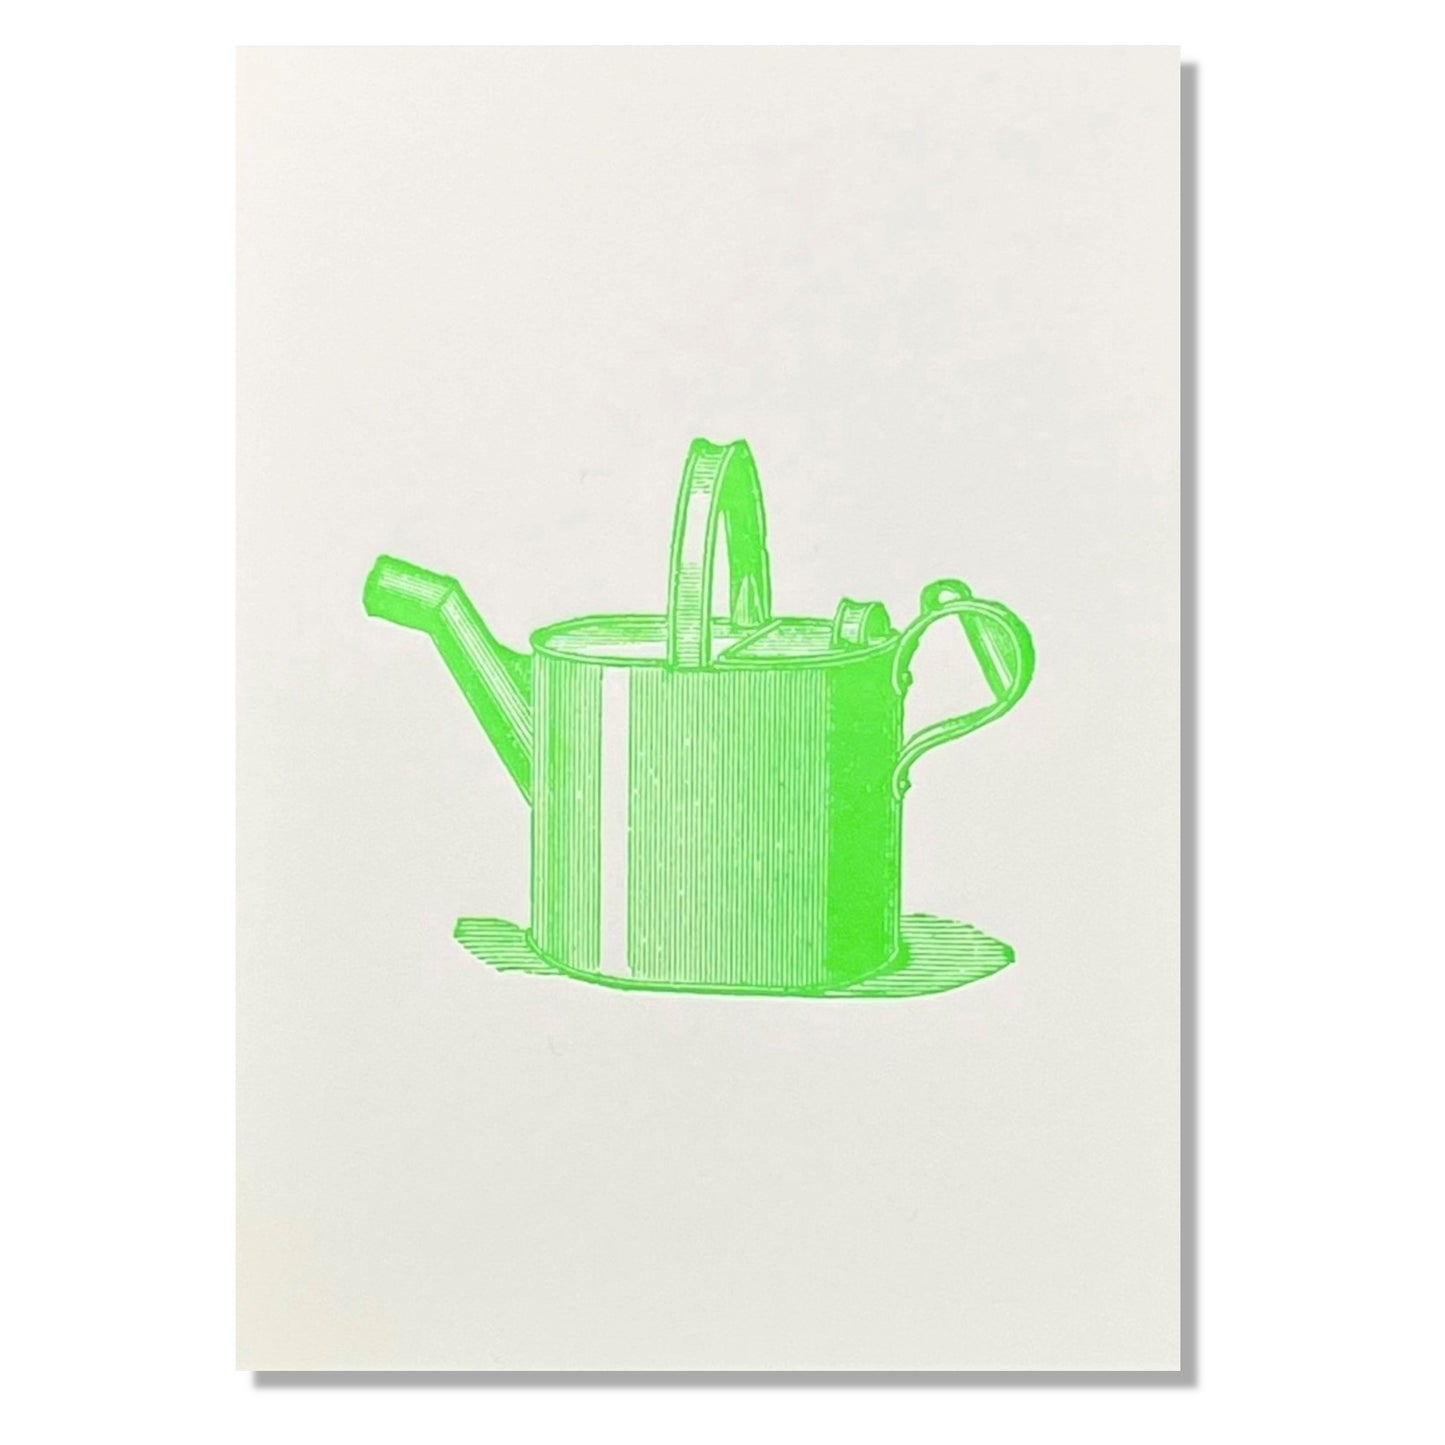 letterpress greetings card of a drawing of a watering can, lime green ink on white by Passenger Press